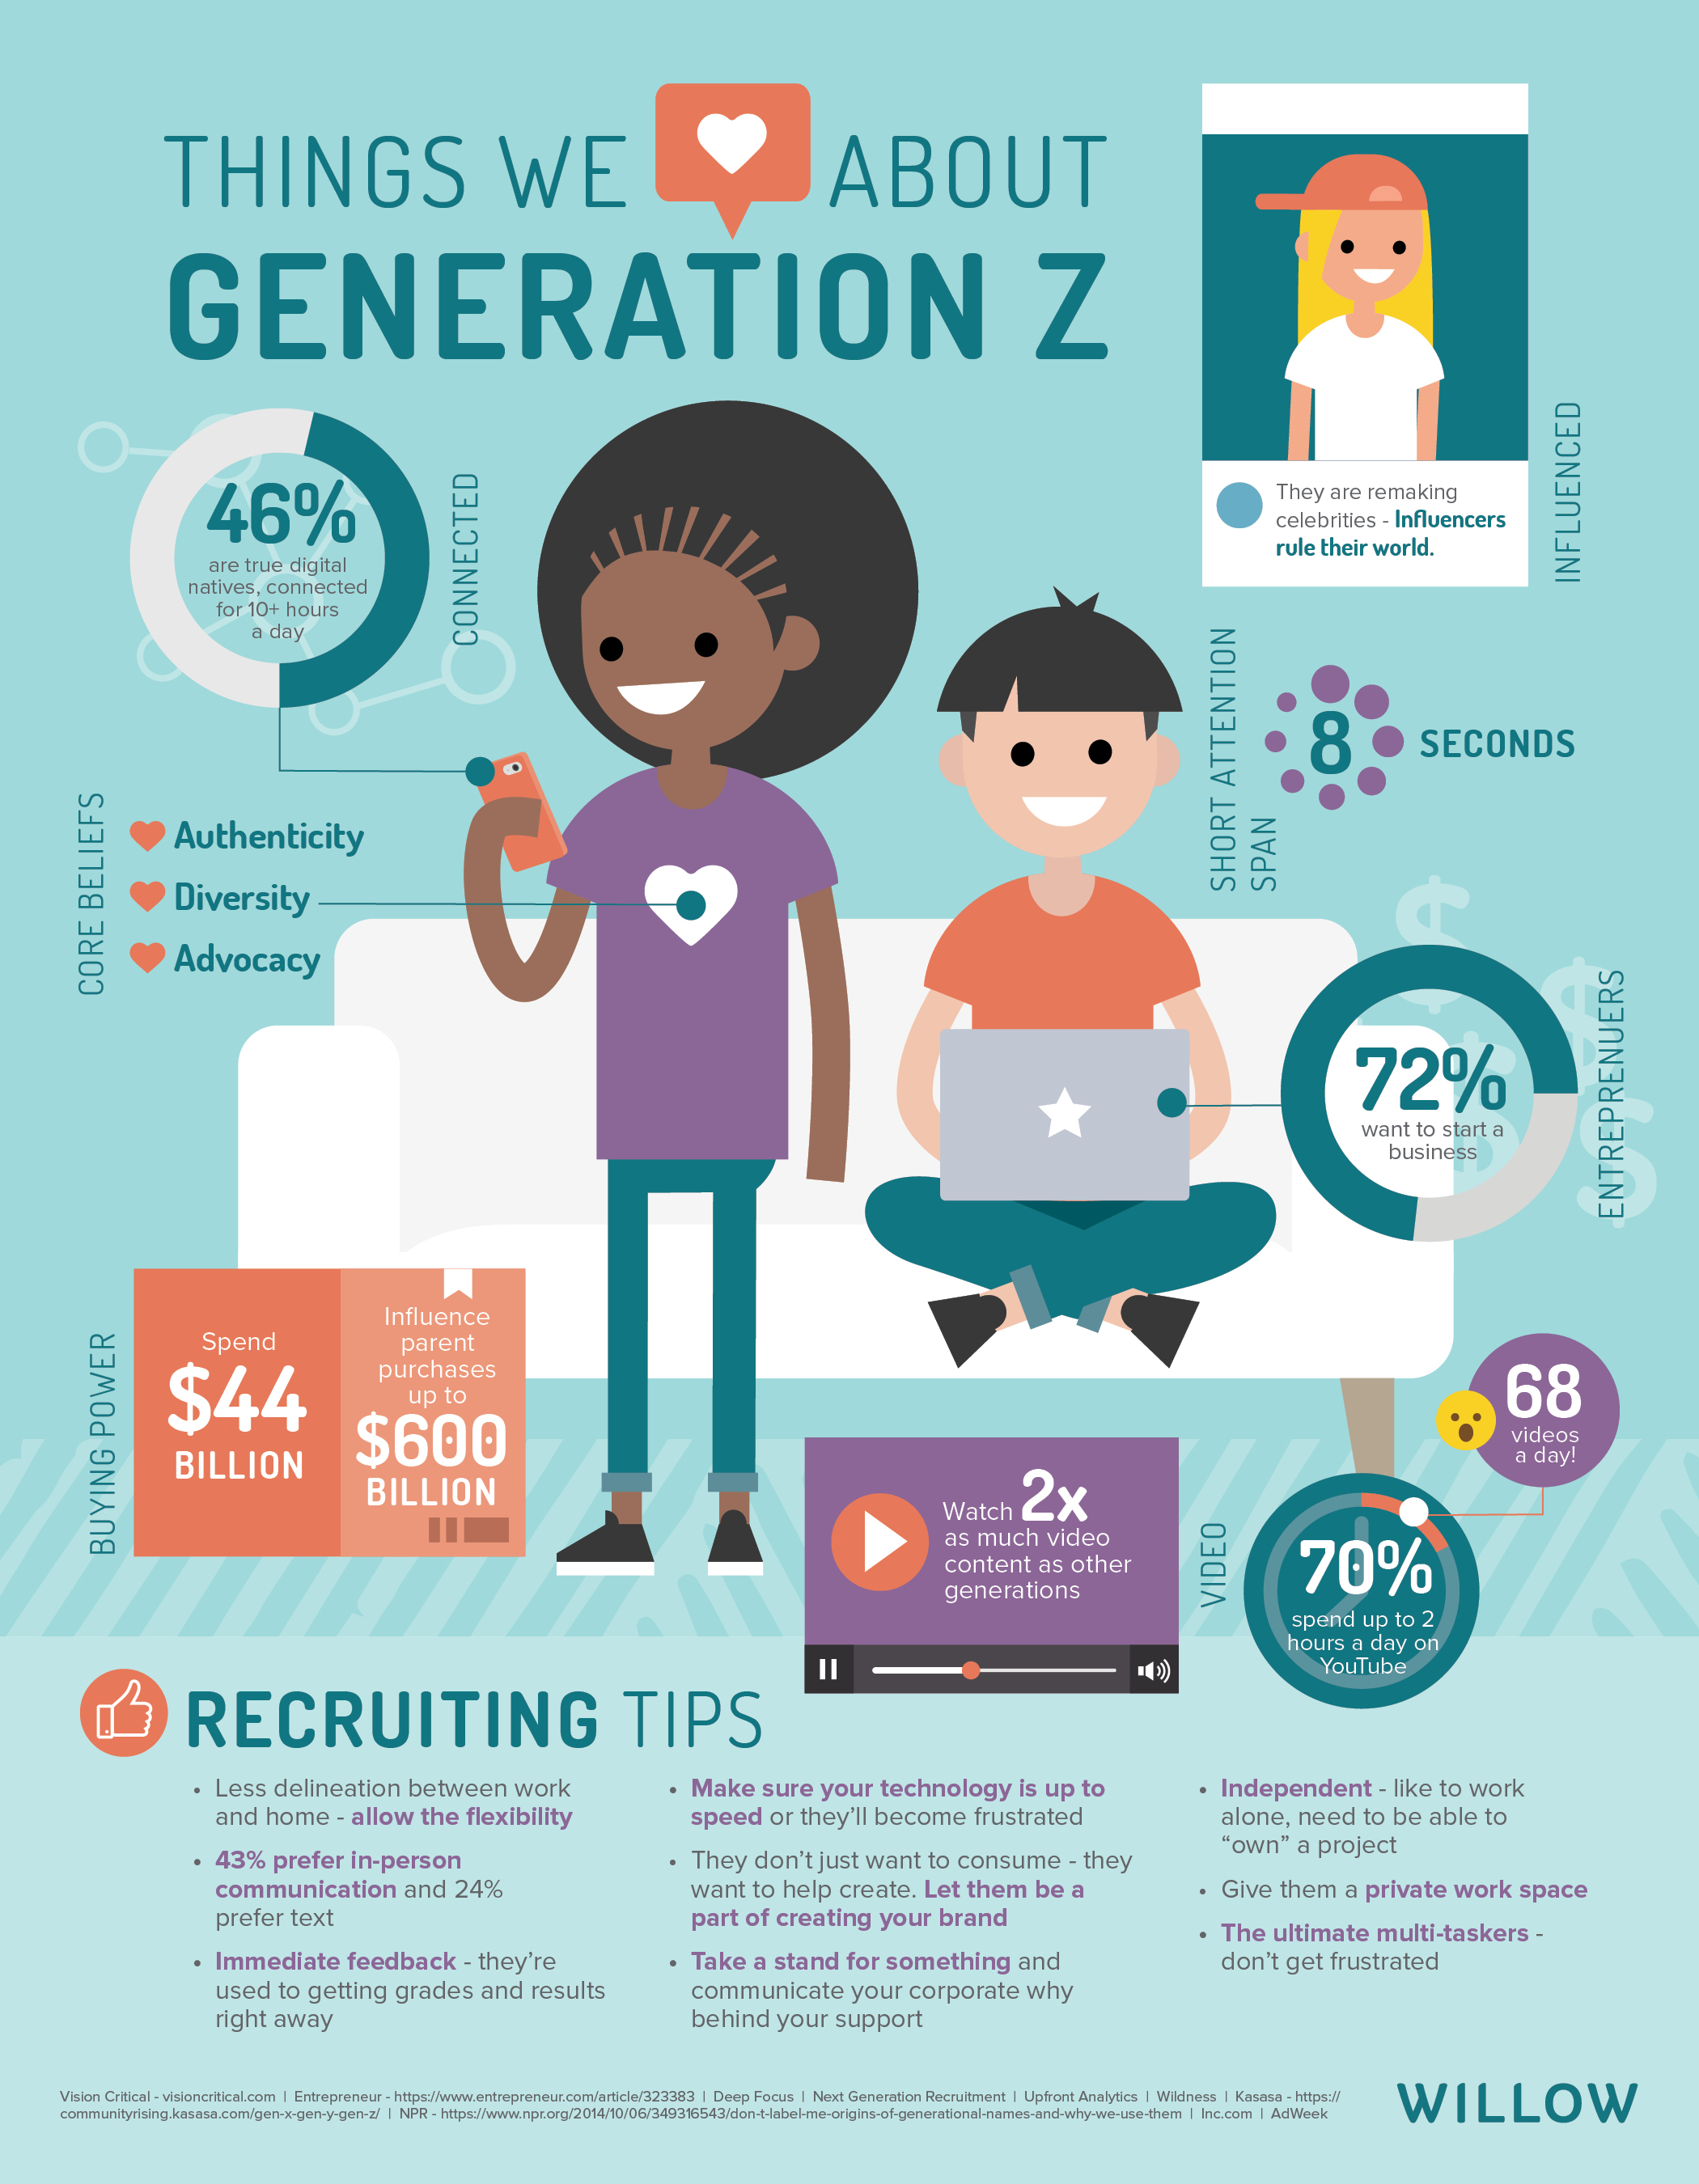 Things We Love About Generation Z Infographic